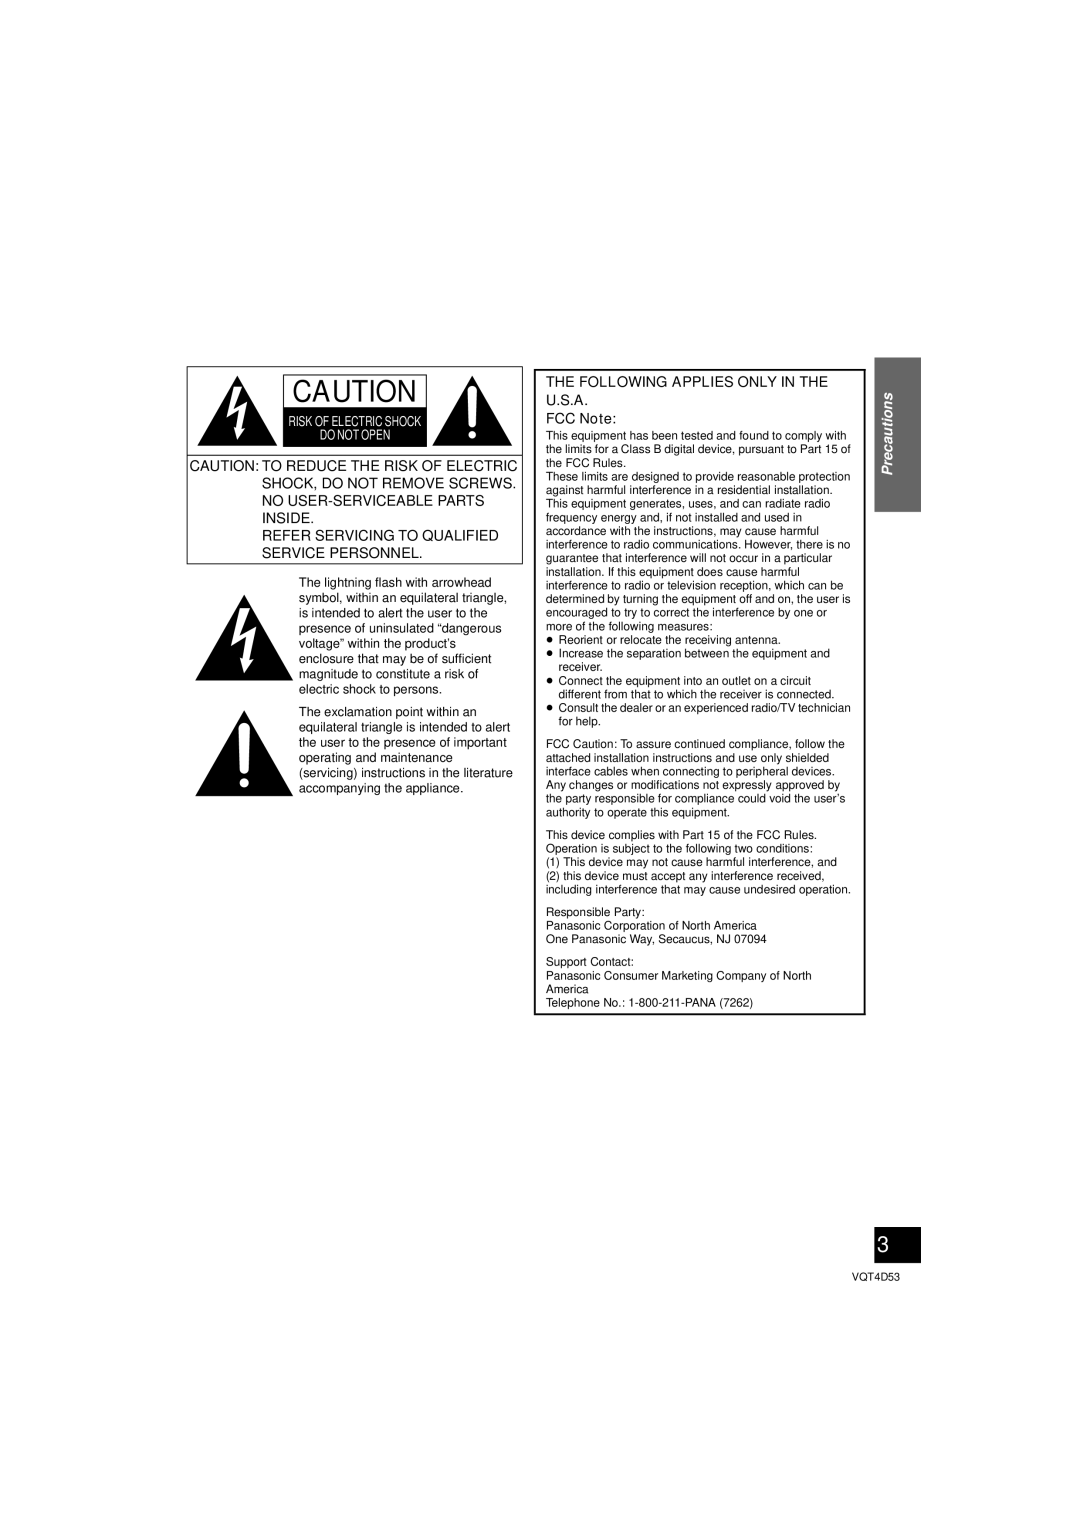 Panasonic SC-HTB20 THE FOLLOWING APPLIES ONLY IN THE U.S.A FCC Note, Precautions, Risk Of Electric Shock Do Not Open 